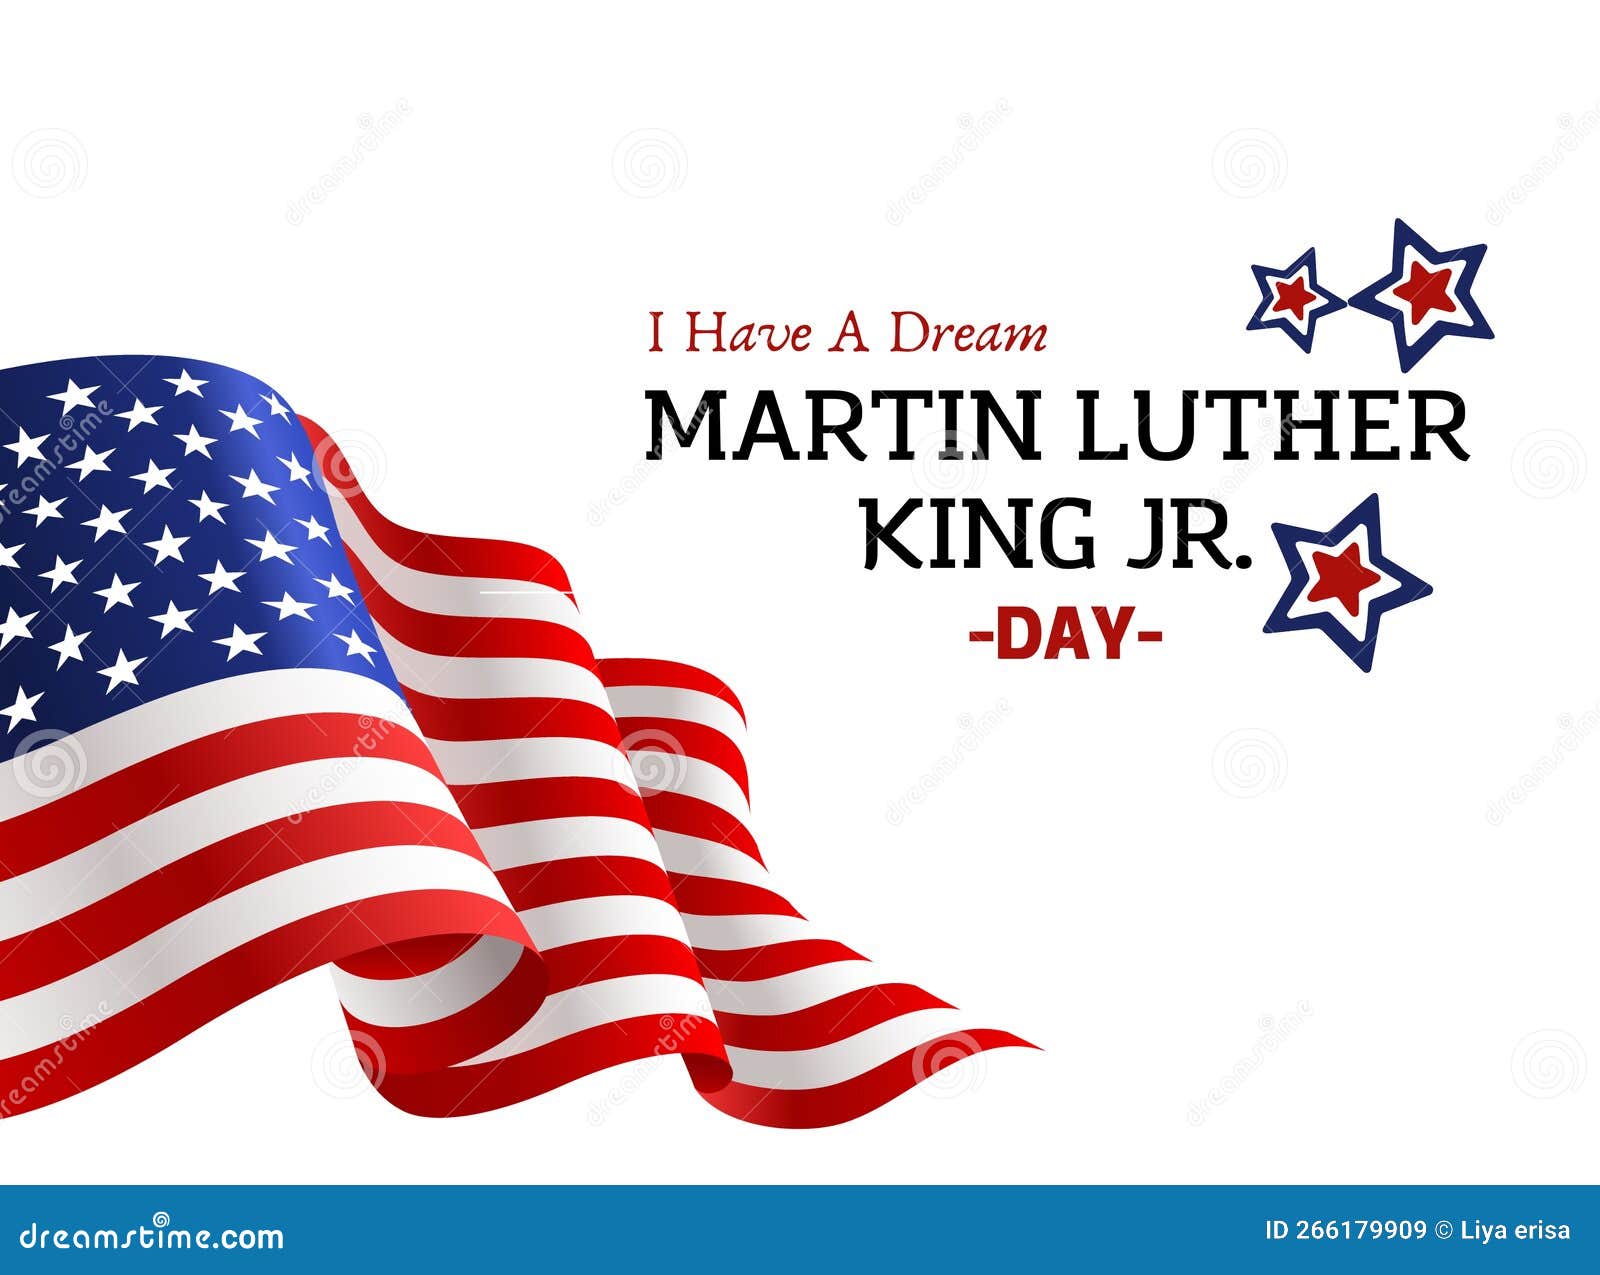 martin luther king jr. day